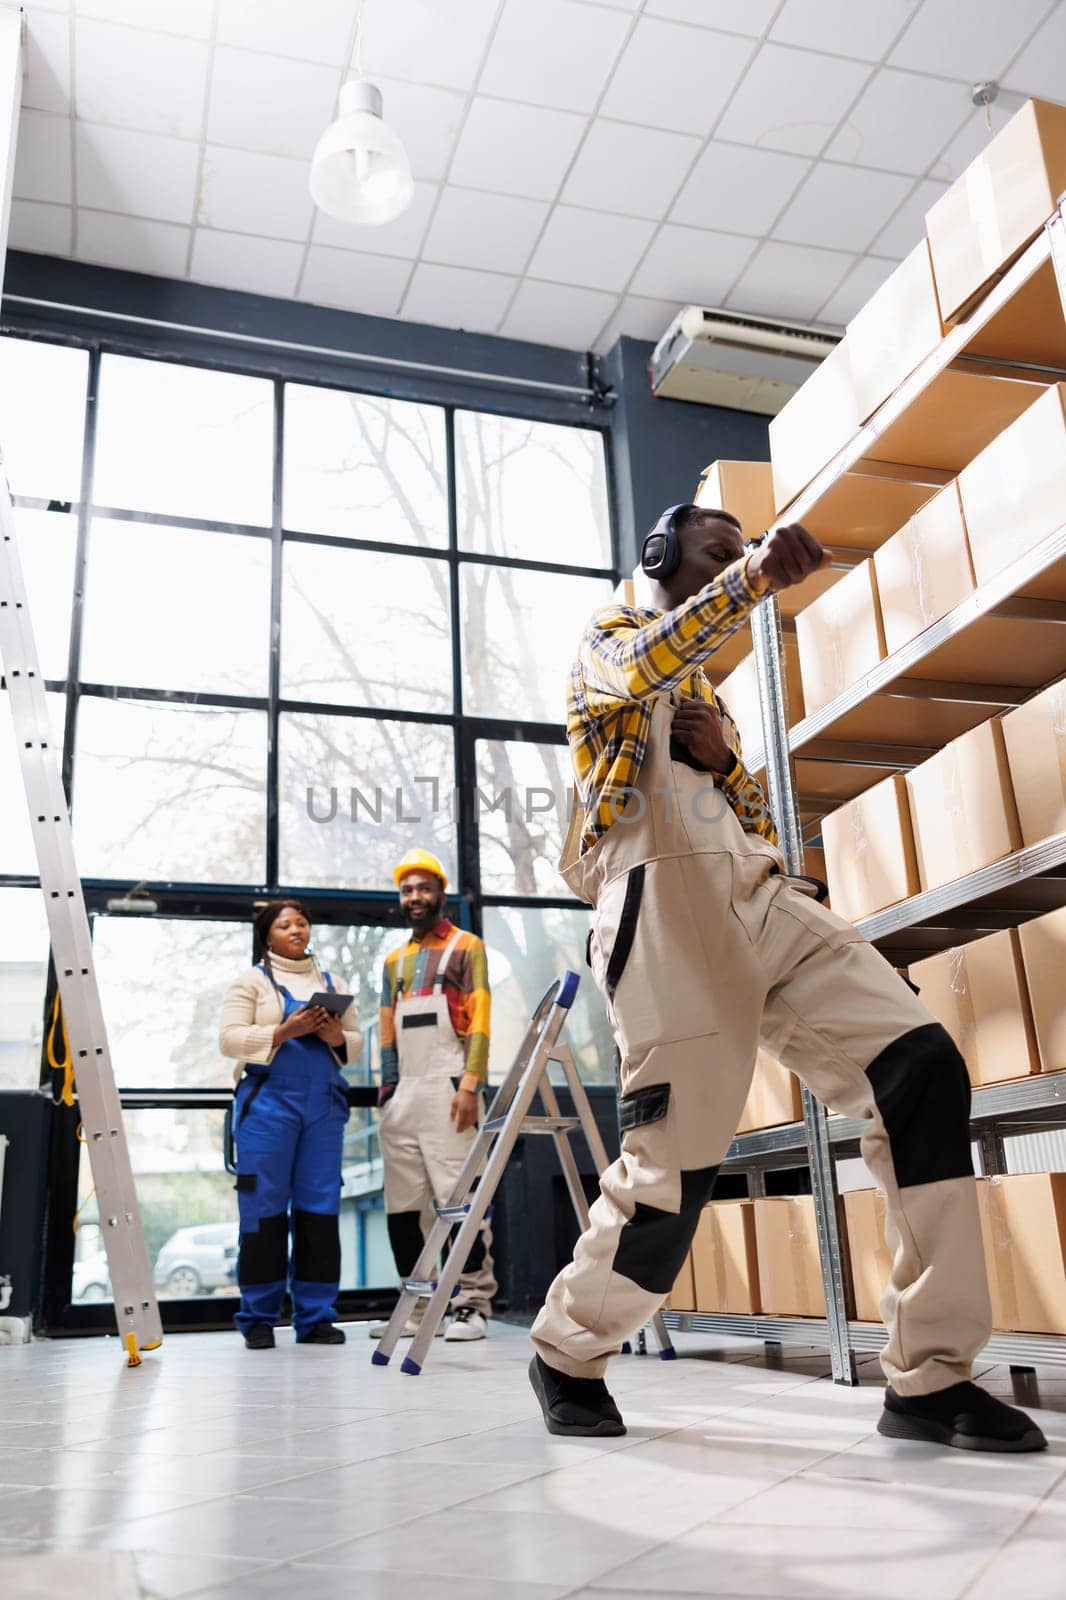 African american young warehouse worker dancing in headphones while doing retail goods inventory. Happy industrial storehouse employee enjoying music and having fun at work